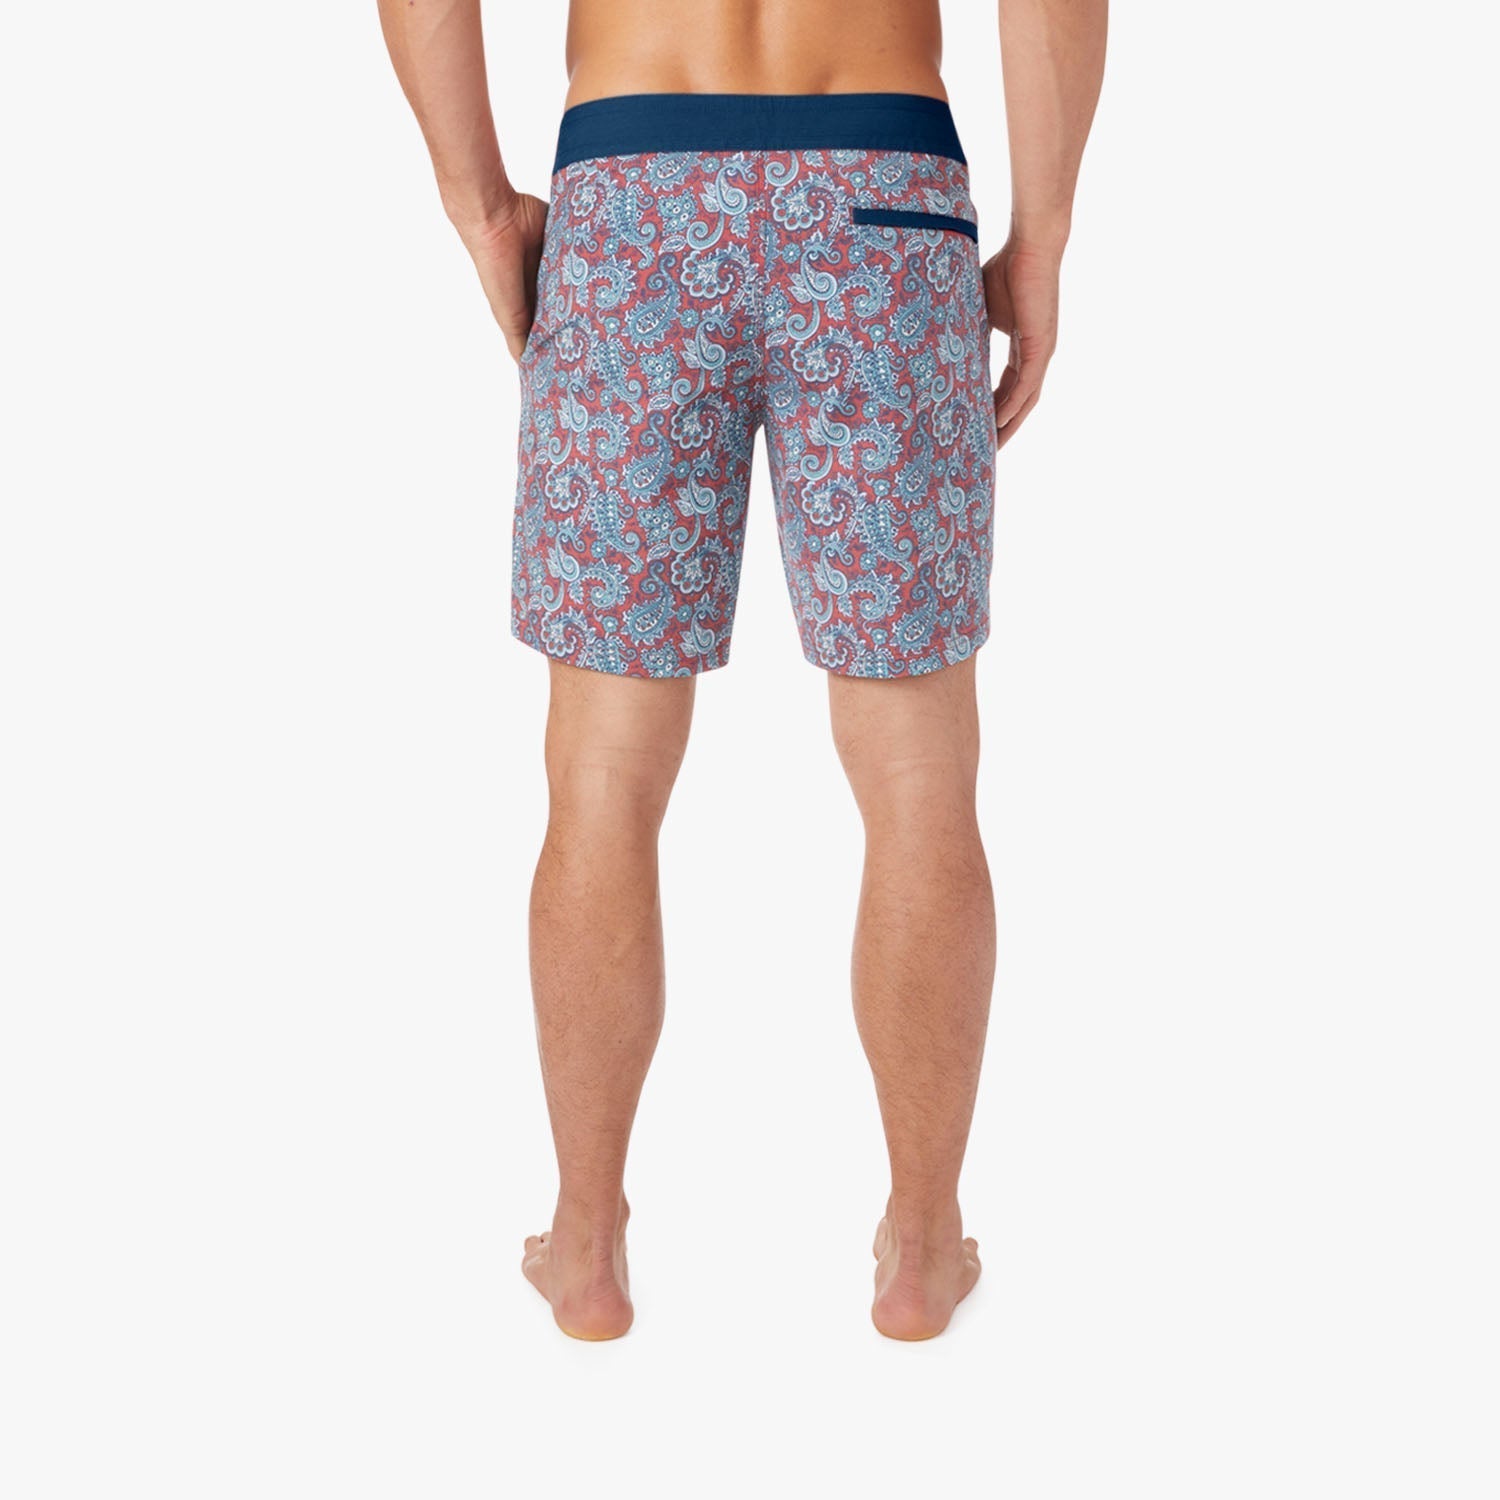 a-place-for-all-your-needs-to-buy-the-nautilus-boardshort-red-paisley-sale_4.jpg